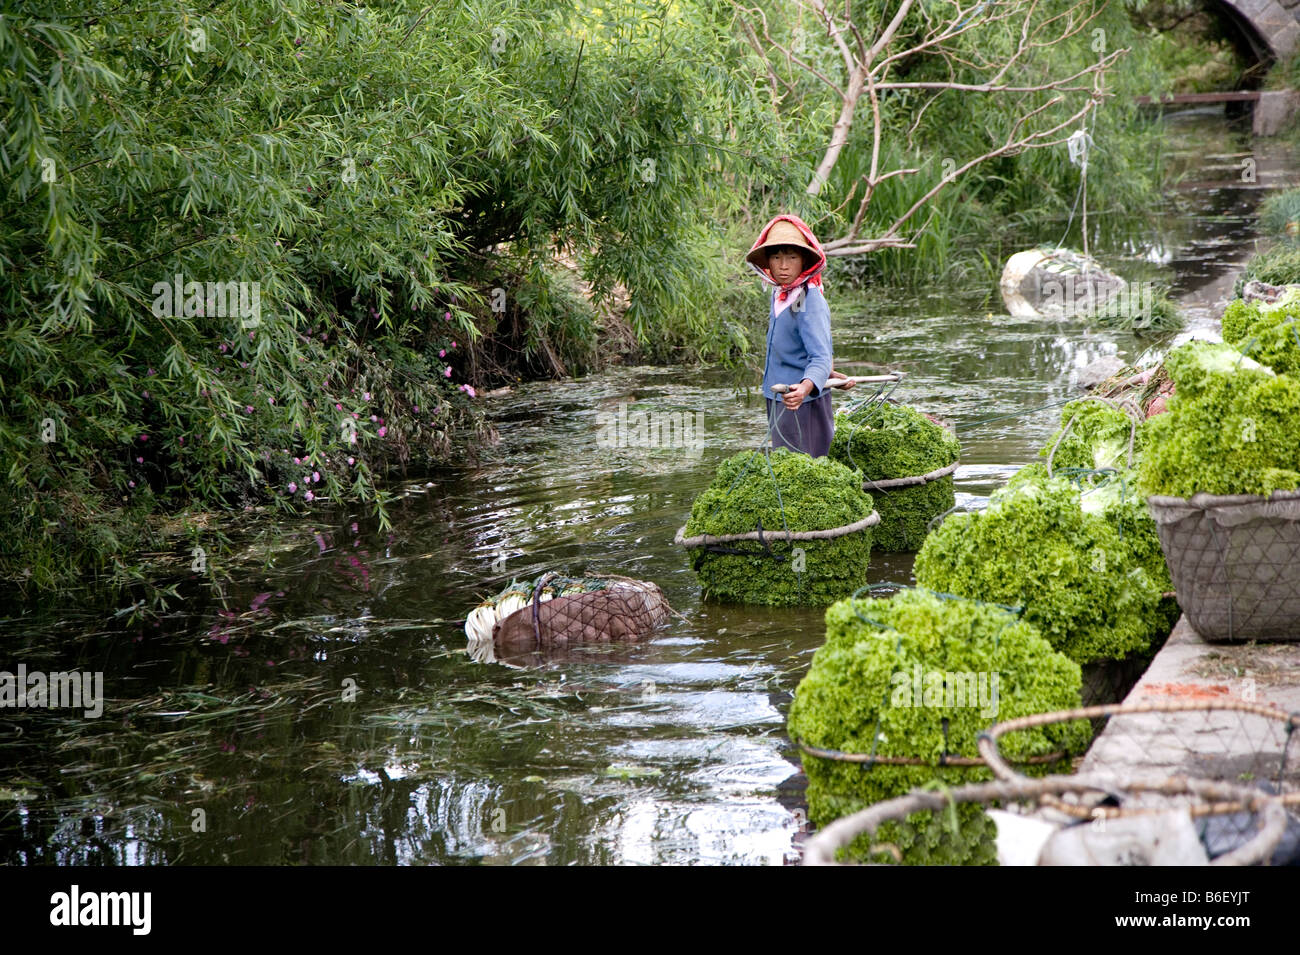 Chinese Woman Floating Down Canal with Fresh Produce, Dali, China Stock Photo